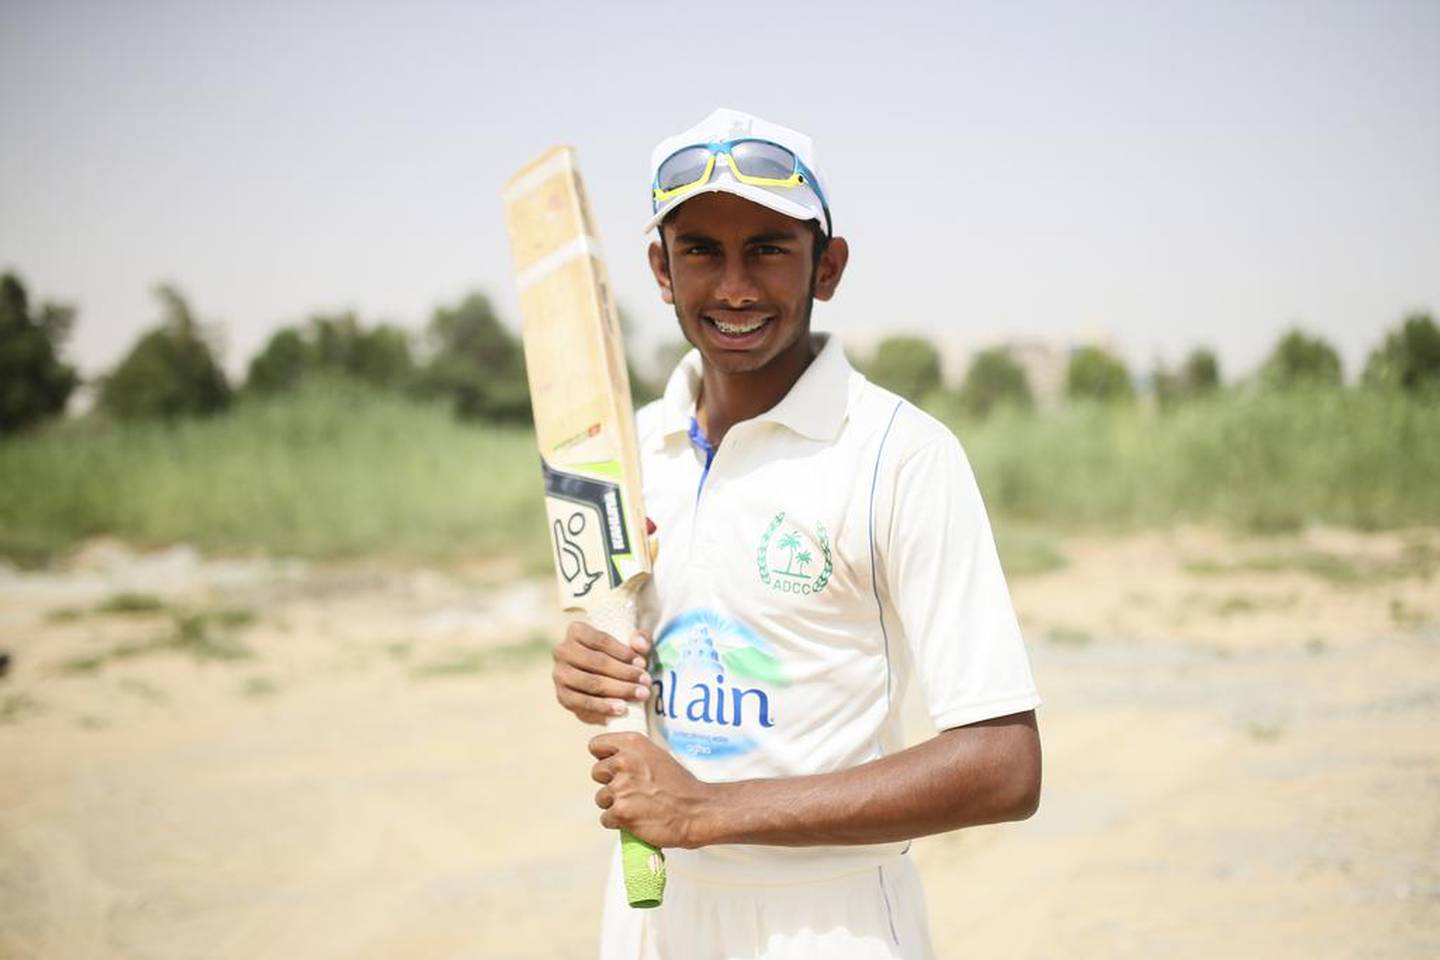 Yodhin Punja is one of the UAE's more promising cricketers. Sarah Dea / The National